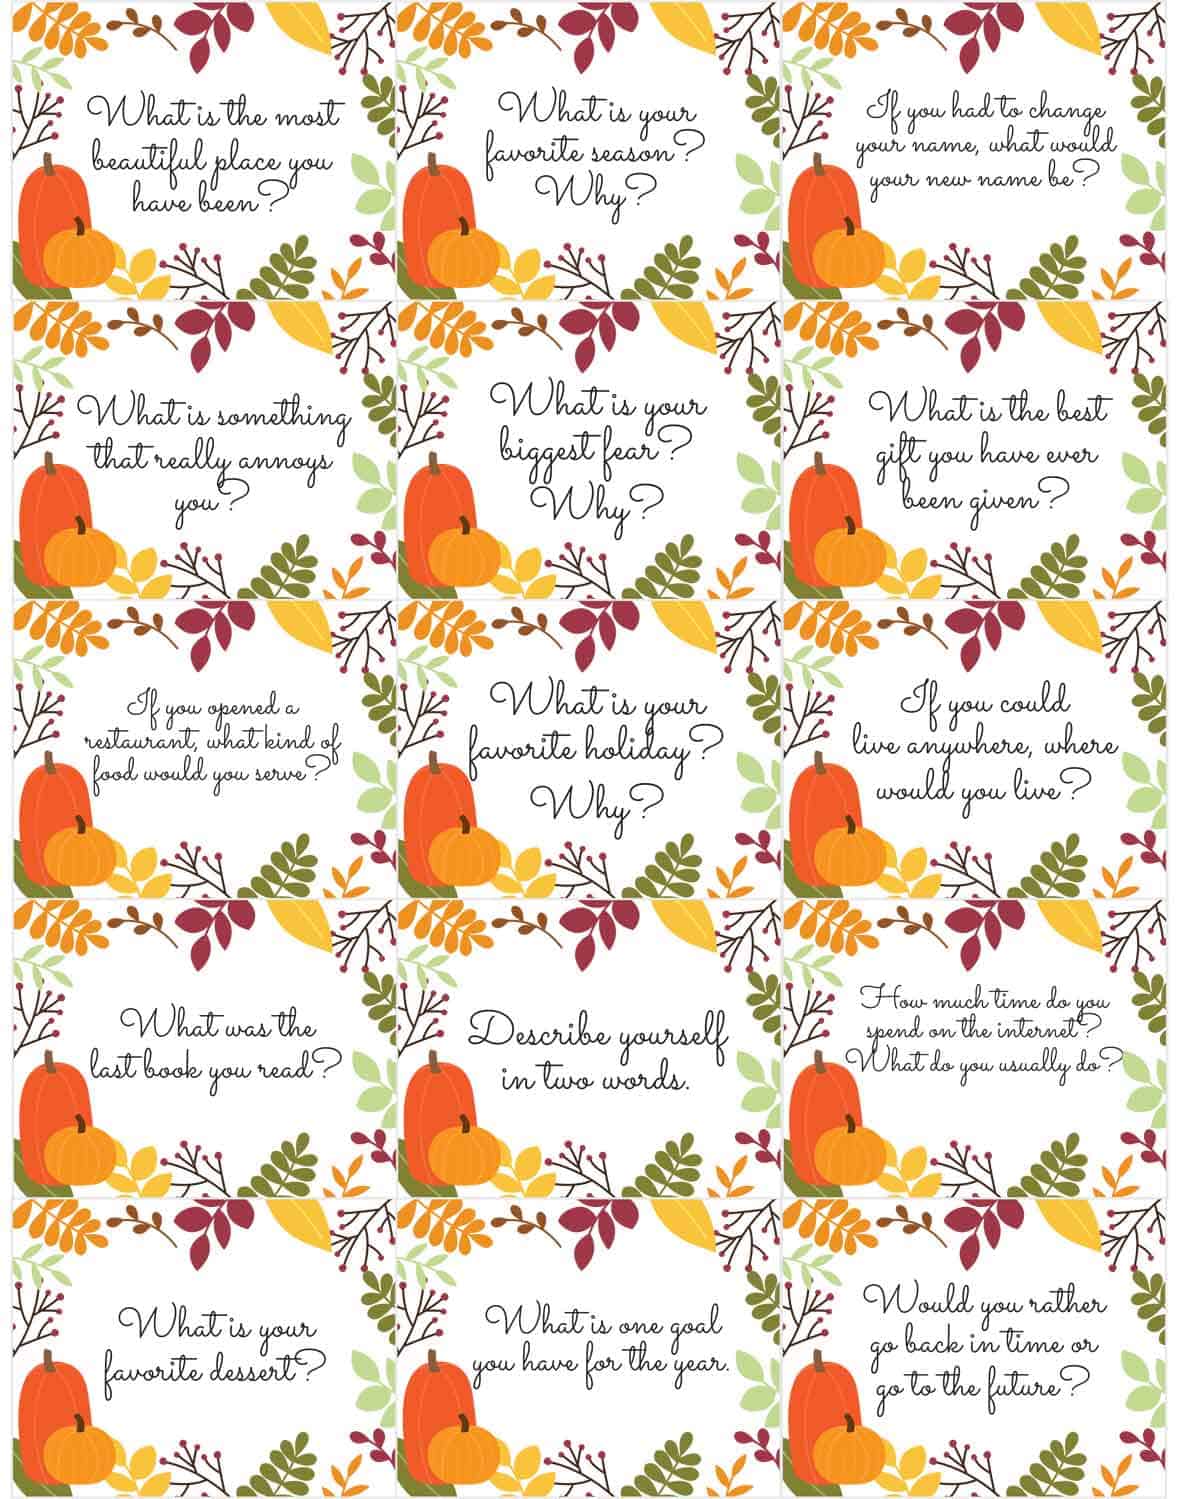 More printable Thanksgiving conversation starters with a pumpkin background.